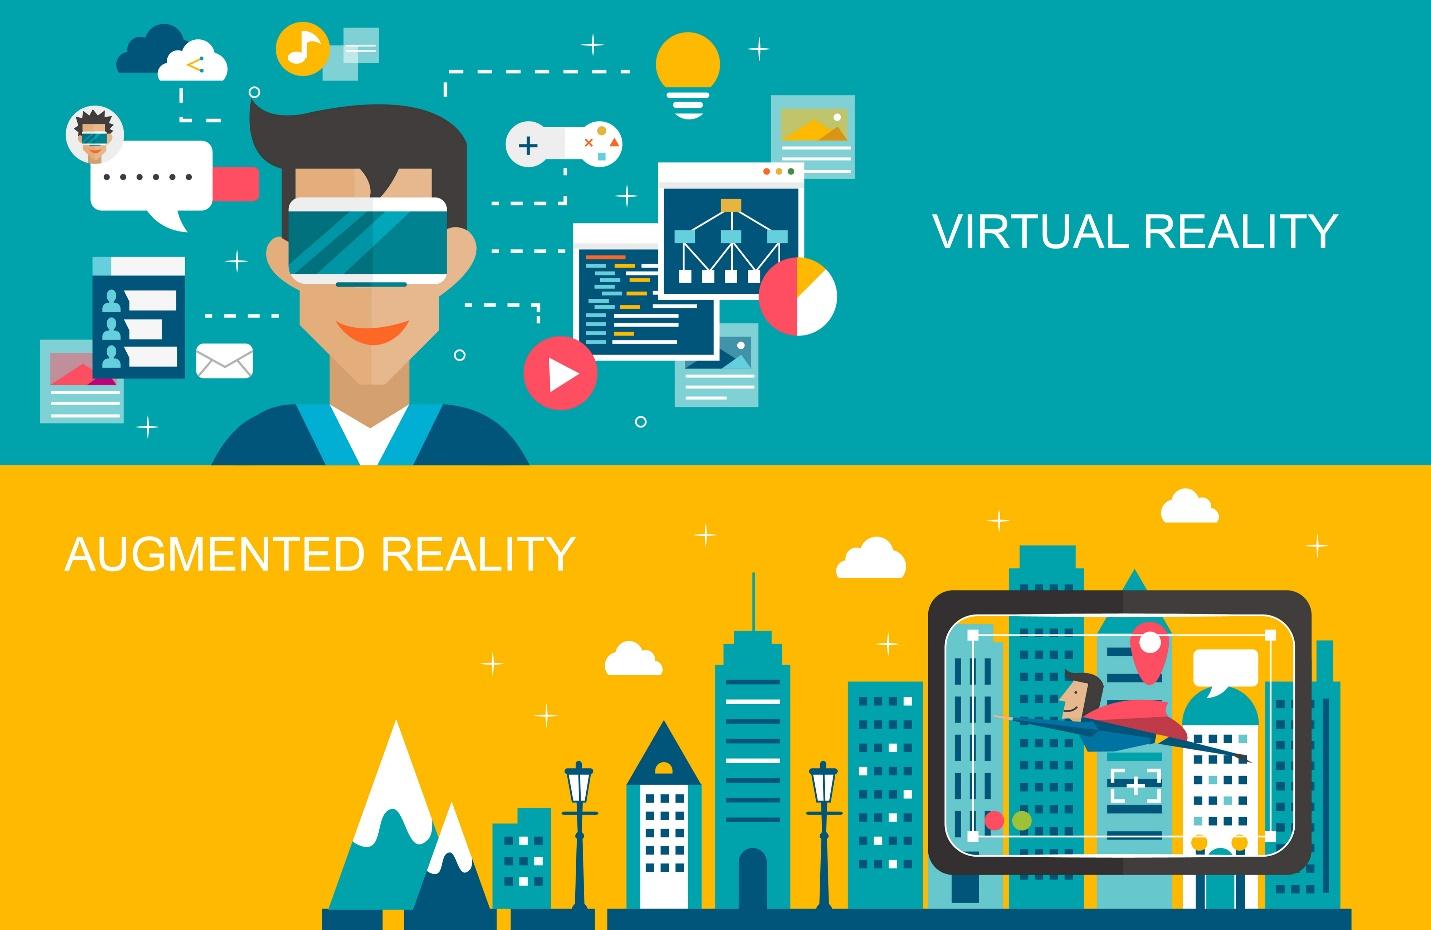 The world of AR/VR and what it holds for us in the future - Blog by Intern